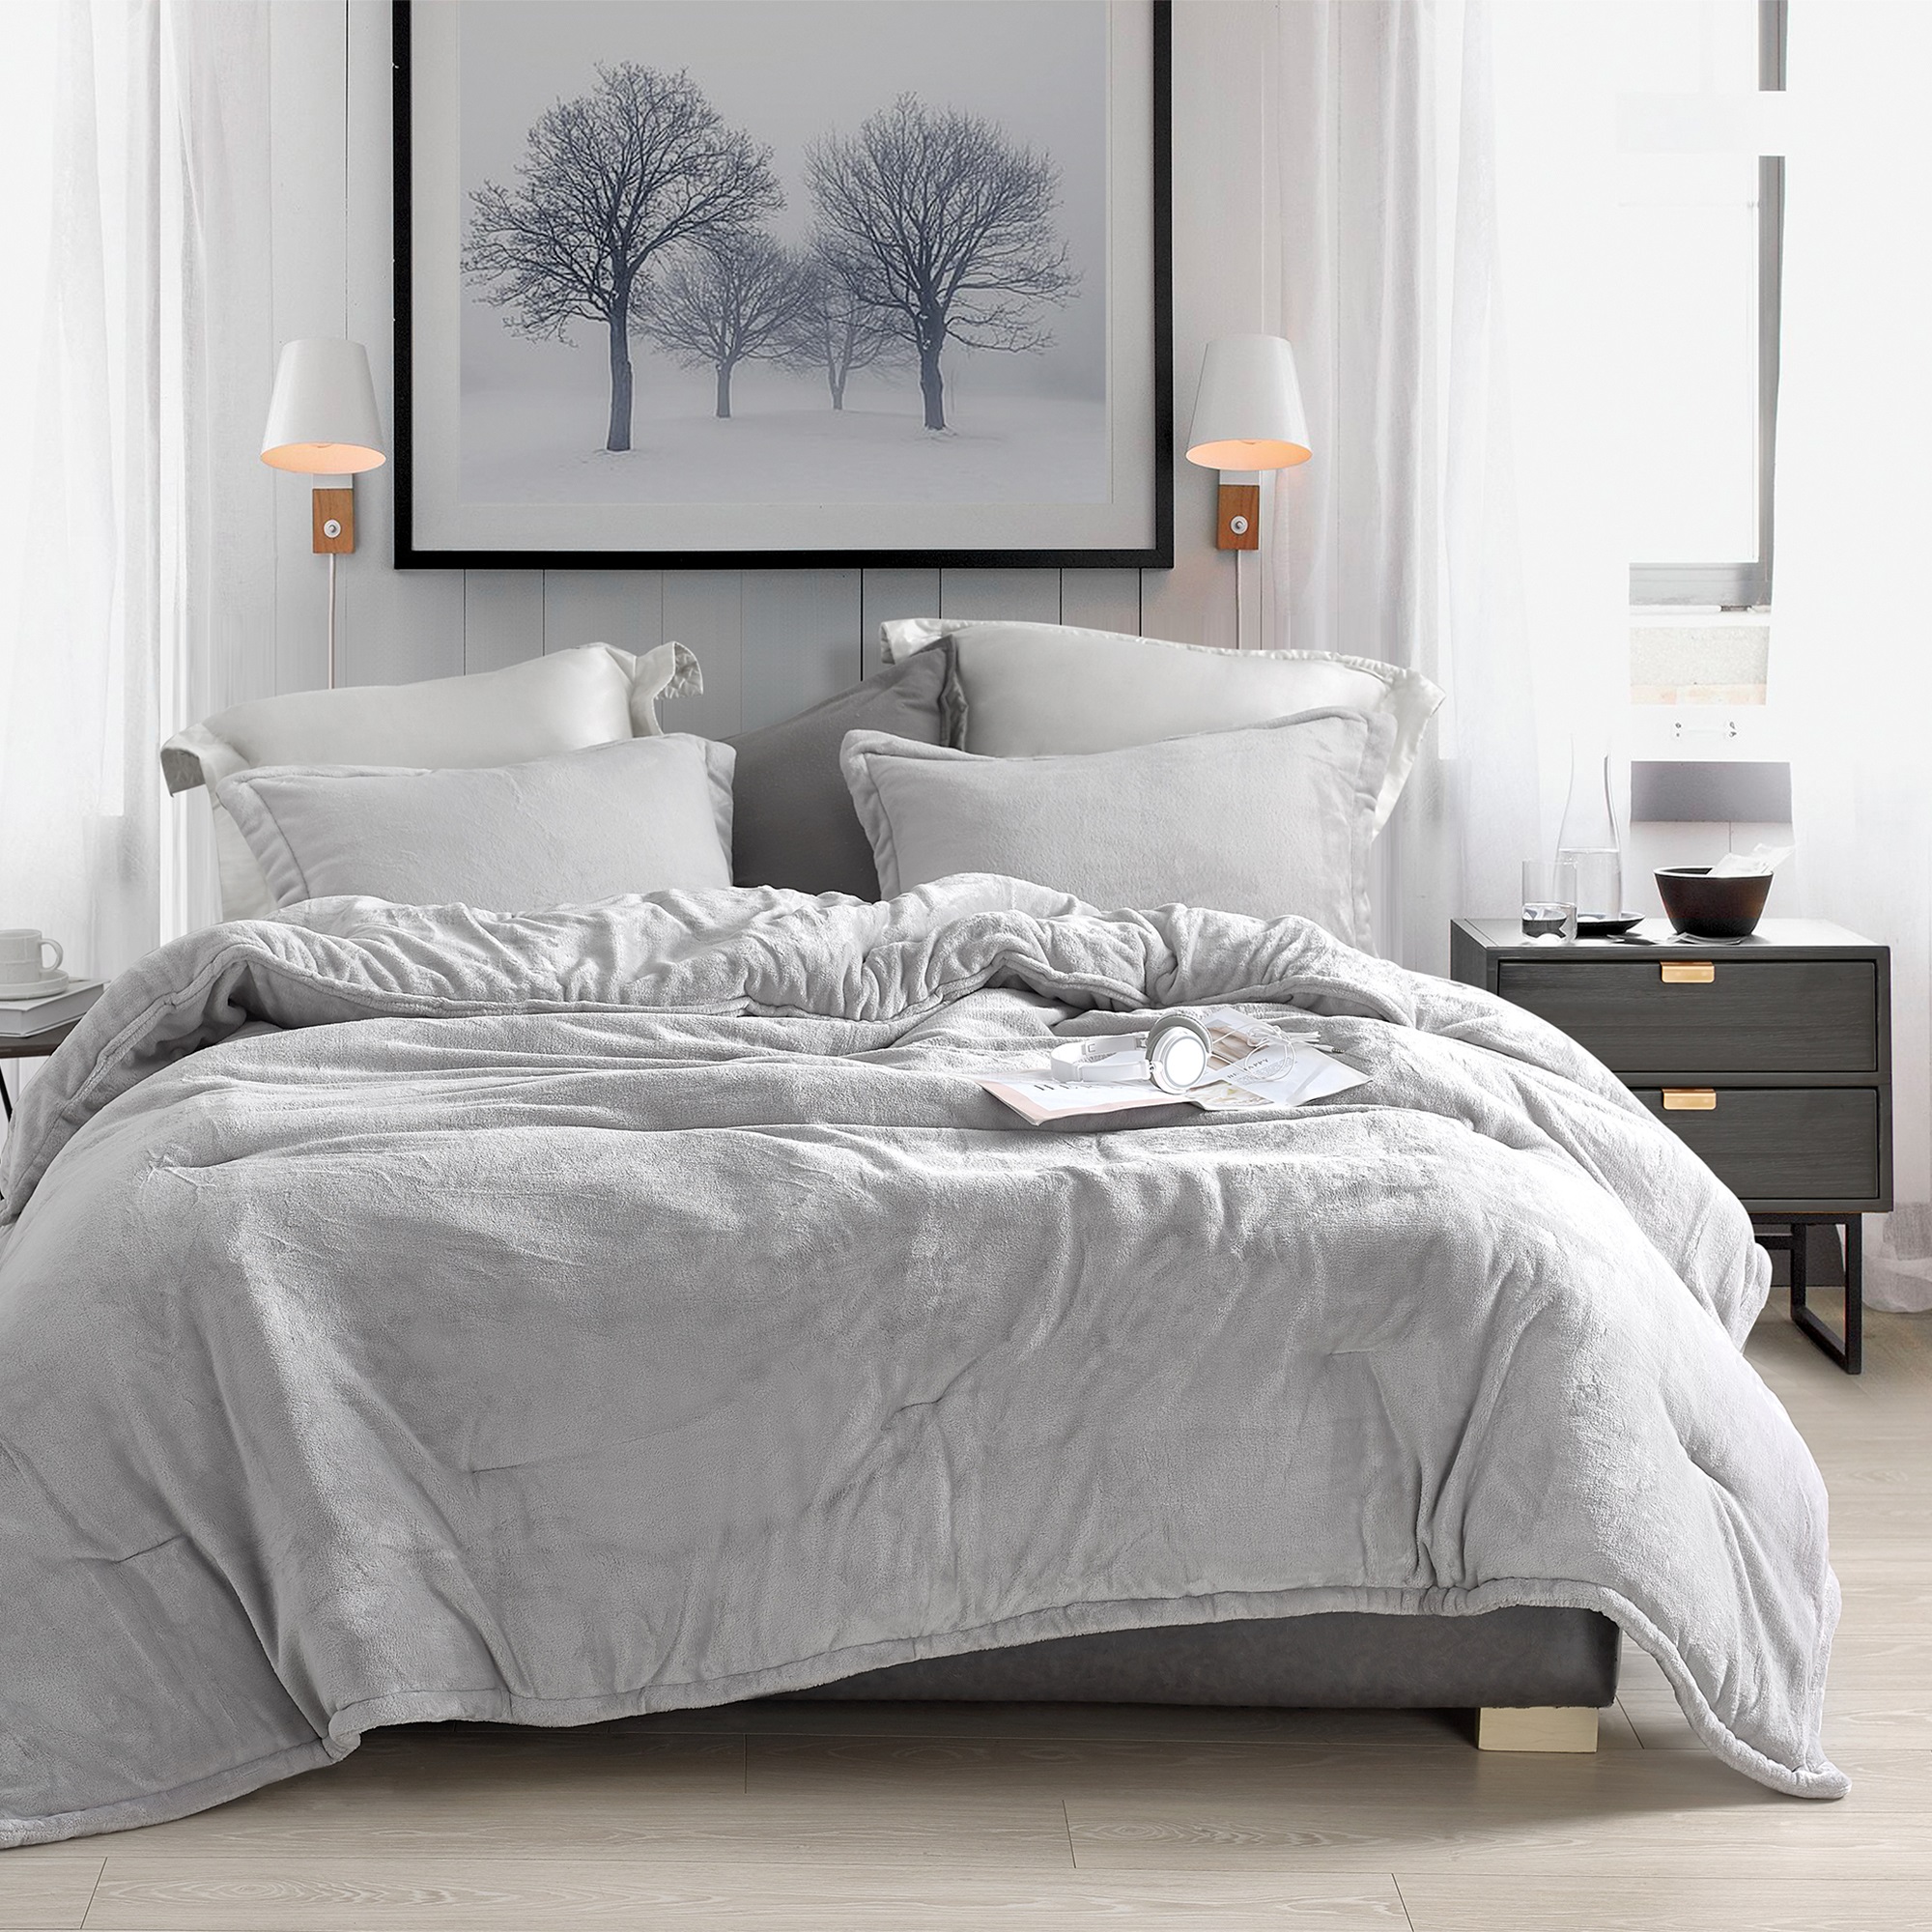 Coma Inducer Oversized Comforter - Wait Oh What - Tundra Gray